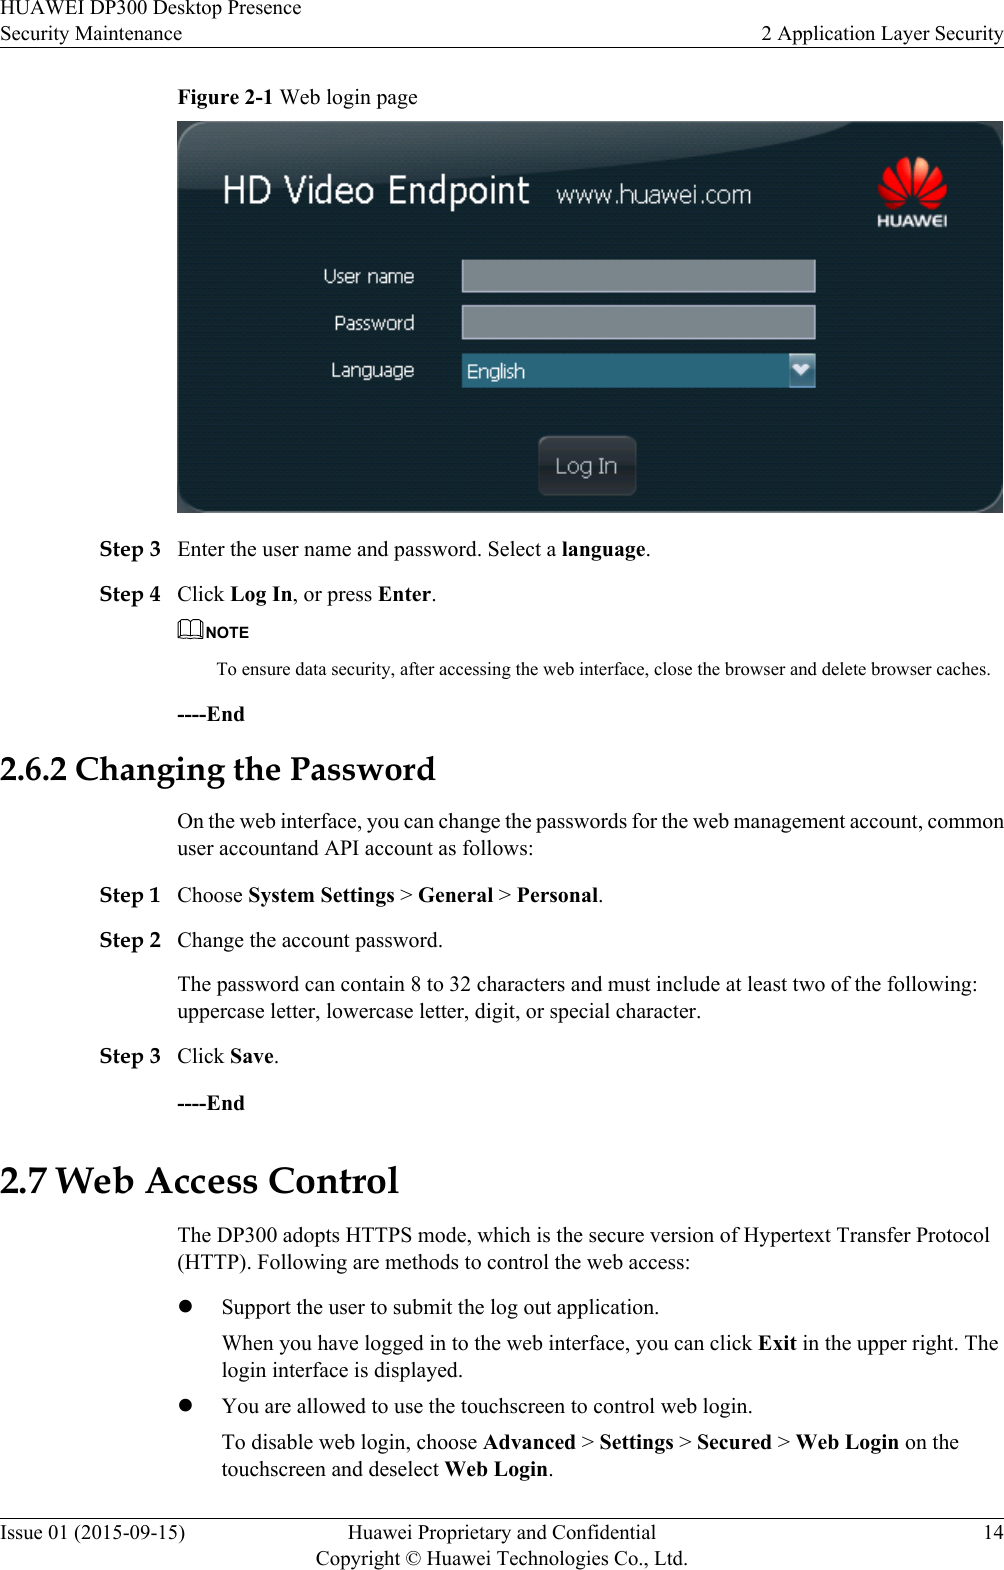 Figure 2-1 Web login pageStep 3 Enter the user name and password. Select a language.Step 4 Click Log In, or press Enter.NOTETo ensure data security, after accessing the web interface, close the browser and delete browser caches.----End2.6.2 Changing the PasswordOn the web interface, you can change the passwords for the web management account, commonuser accountand API account as follows:Step 1 Choose System Settings &gt; General &gt; Personal.Step 2 Change the account password.The password can contain 8 to 32 characters and must include at least two of the following:uppercase letter, lowercase letter, digit, or special character.Step 3 Click Save.----End2.7 Web Access ControlThe DP300 adopts HTTPS mode, which is the secure version of Hypertext Transfer Protocol(HTTP). Following are methods to control the web access:lSupport the user to submit the log out application.When you have logged in to the web interface, you can click Exit in the upper right. Thelogin interface is displayed.lYou are allowed to use the touchscreen to control web login.To disable web login, choose Advanced &gt; Settings &gt; Secured &gt; Web Login on thetouchscreen and deselect Web Login.HUAWEI DP300 Desktop PresenceSecurity Maintenance 2 Application Layer SecurityIssue 01 (2015-09-15) Huawei Proprietary and ConfidentialCopyright © Huawei Technologies Co., Ltd.14